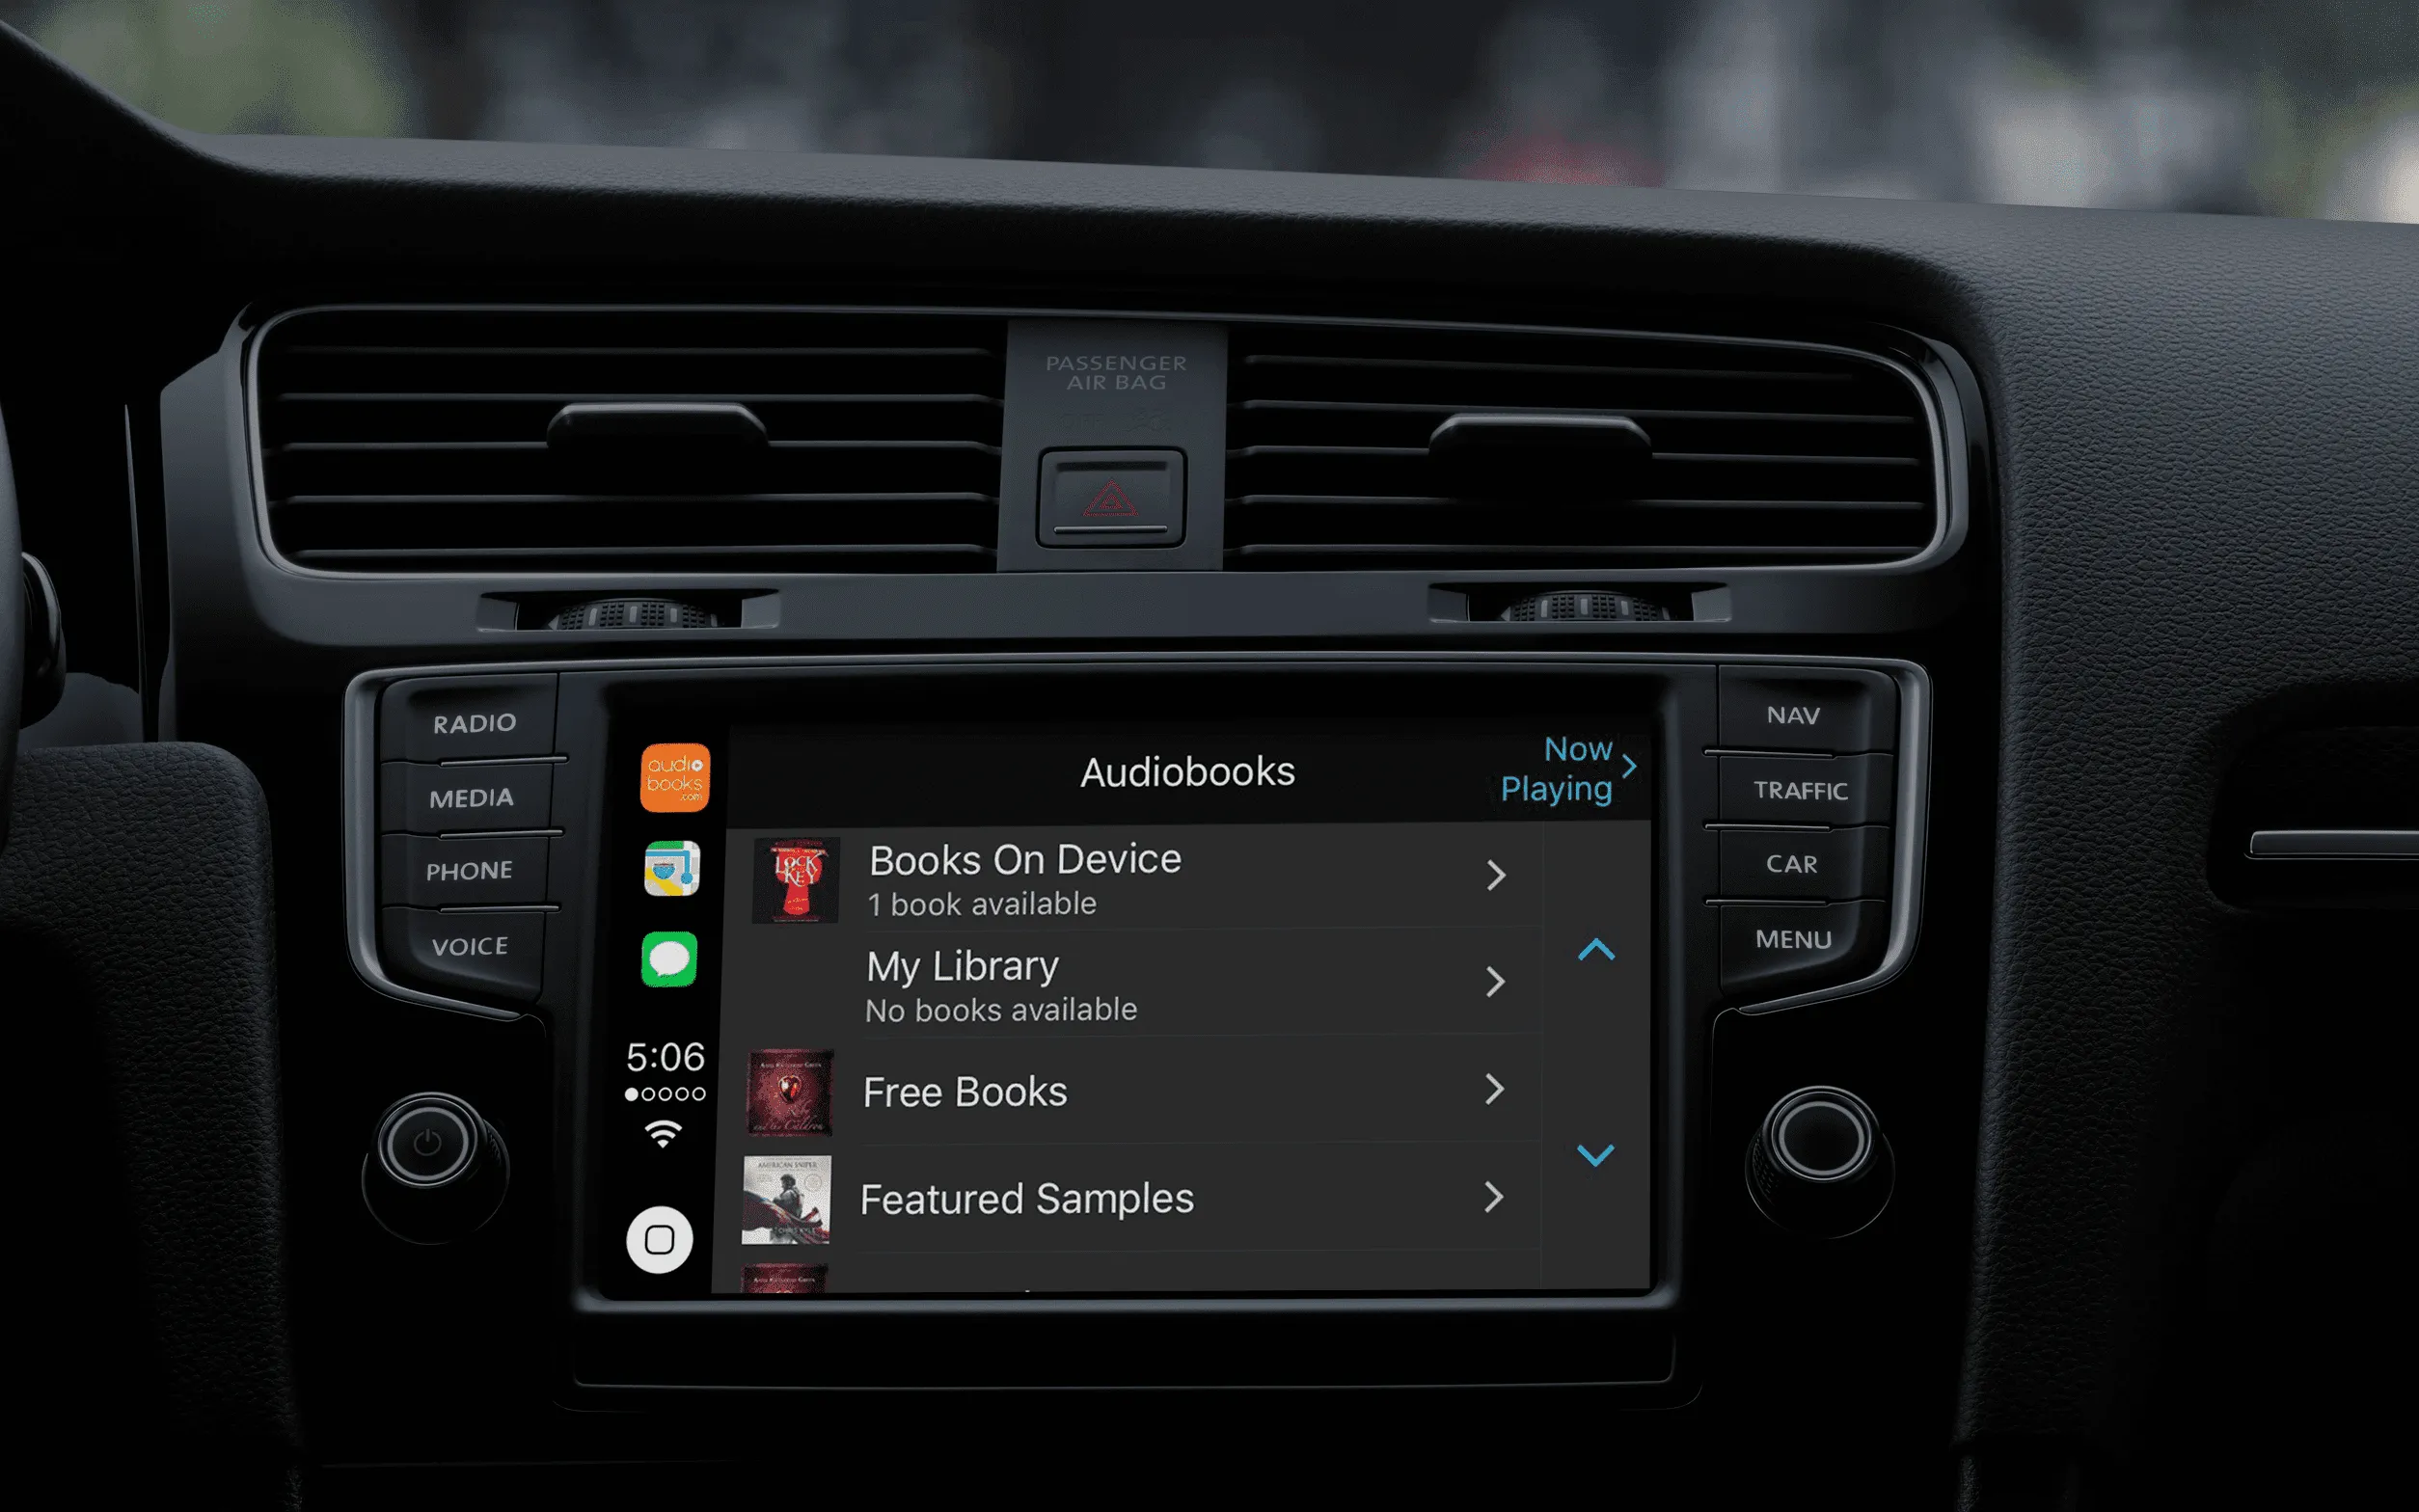 Apps supported by apple CarPlay: Audiobooks